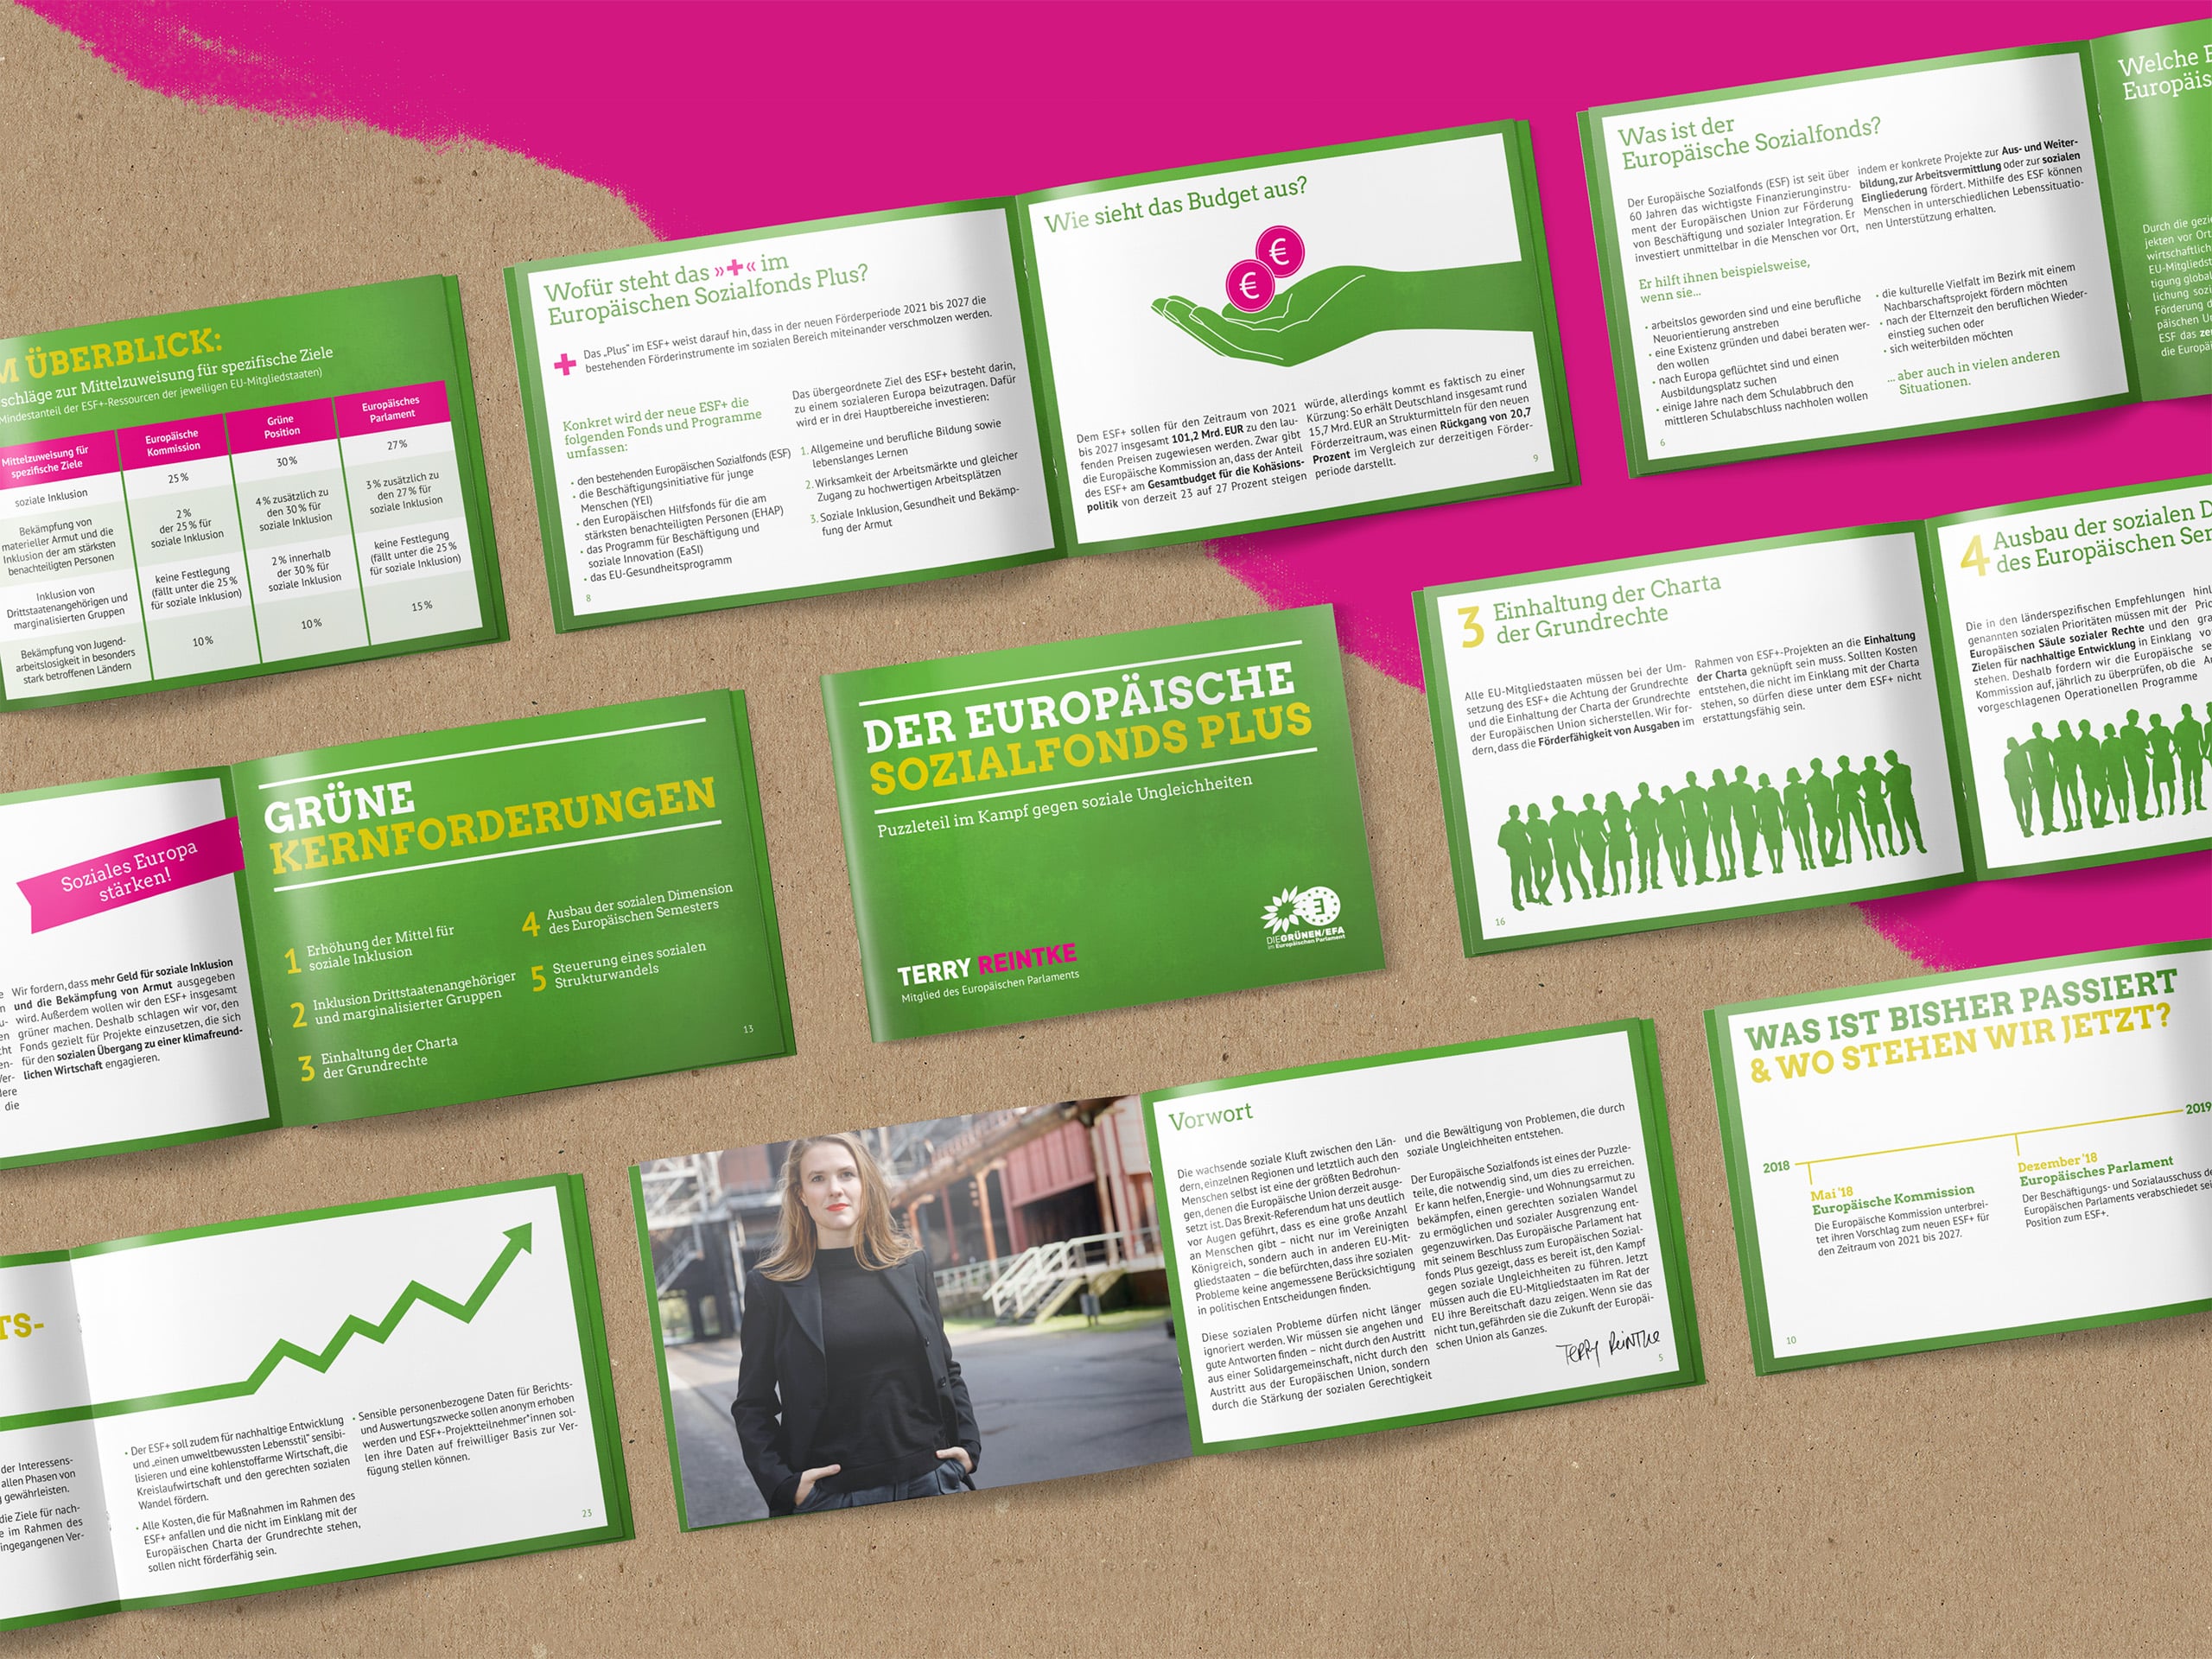 The designed brochure layout spread out, so all pages and illustrations are visible